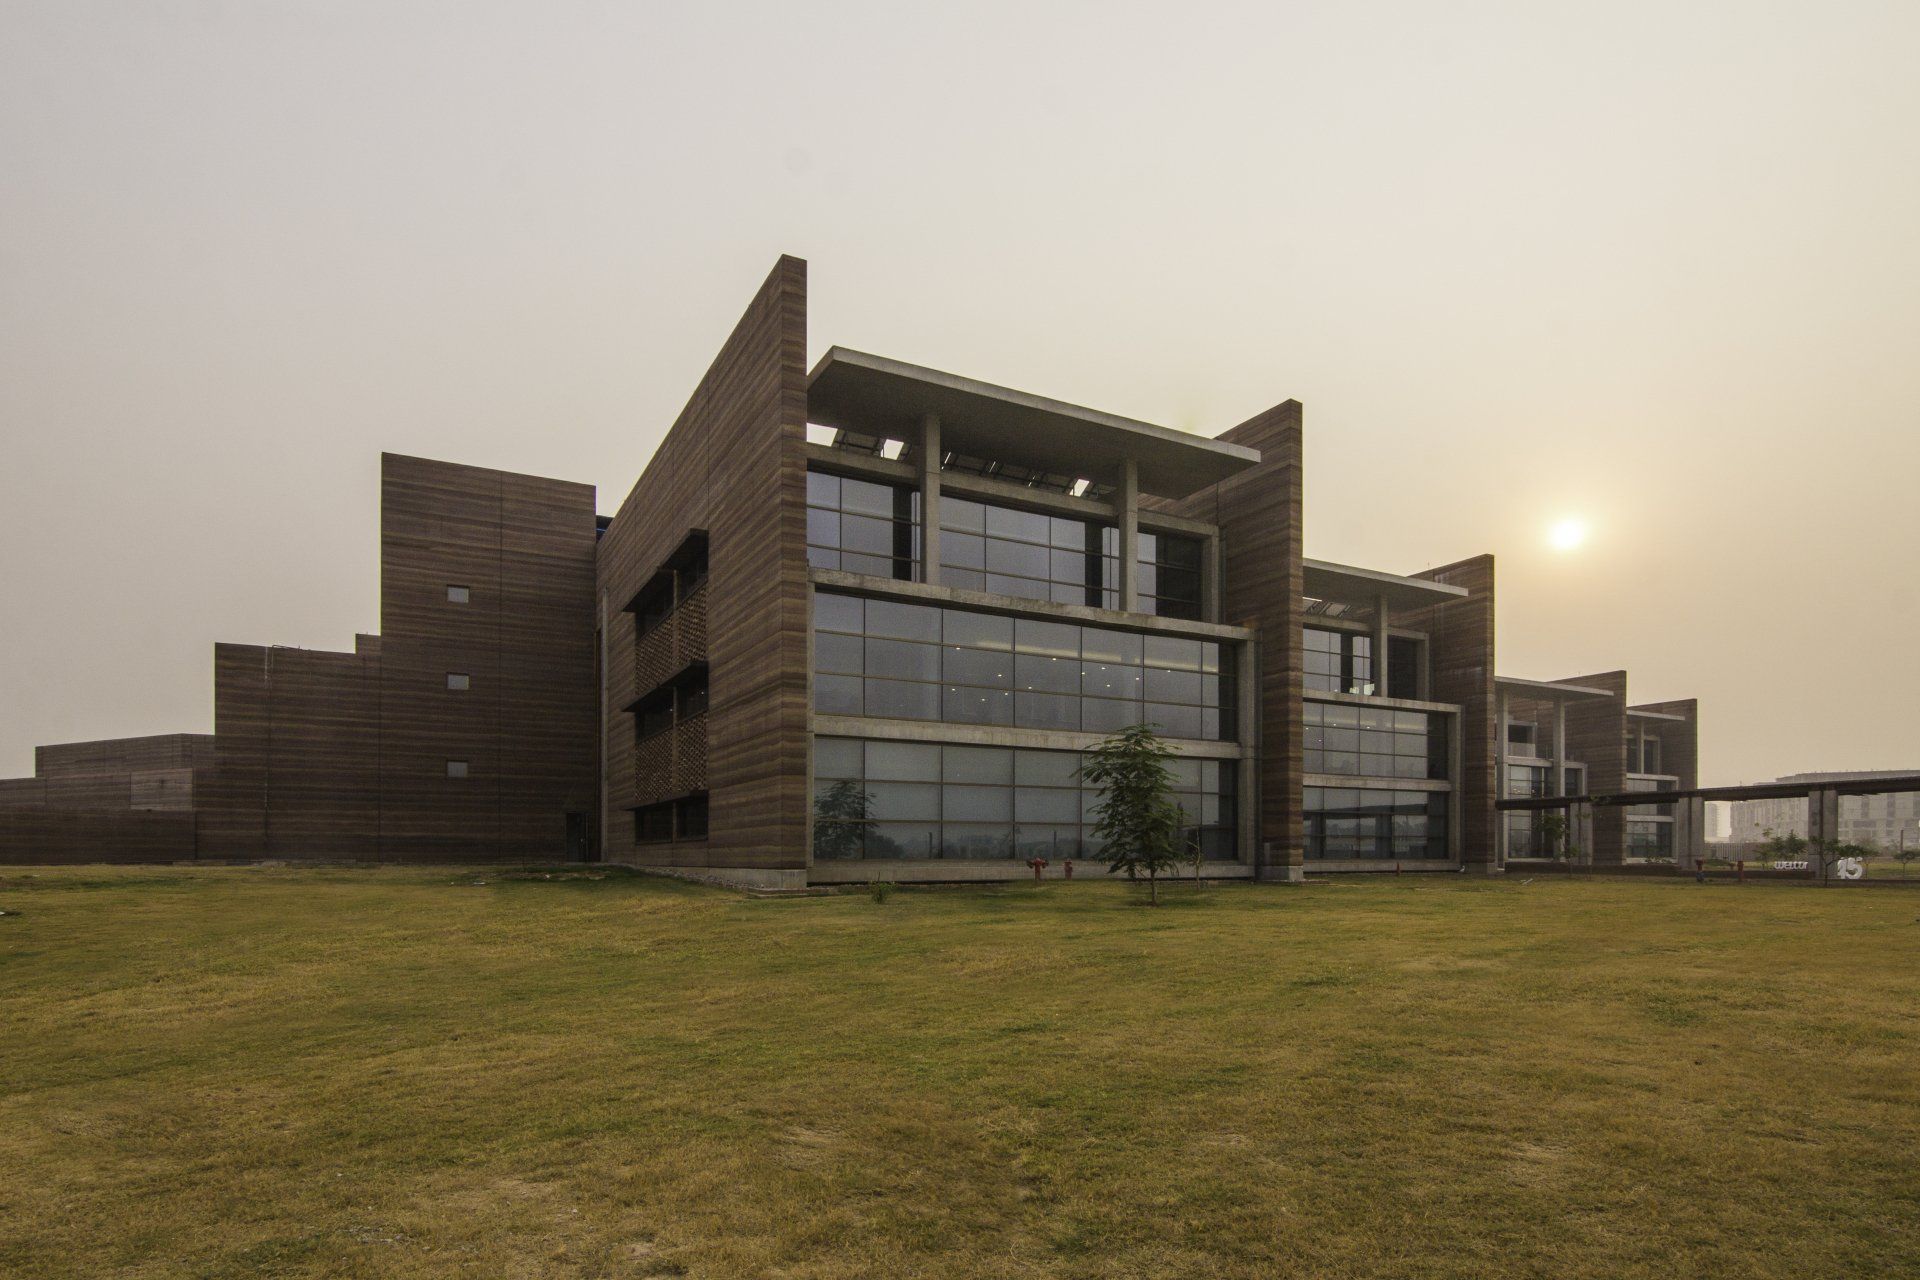 three story rammed earth office building on grassy lawn